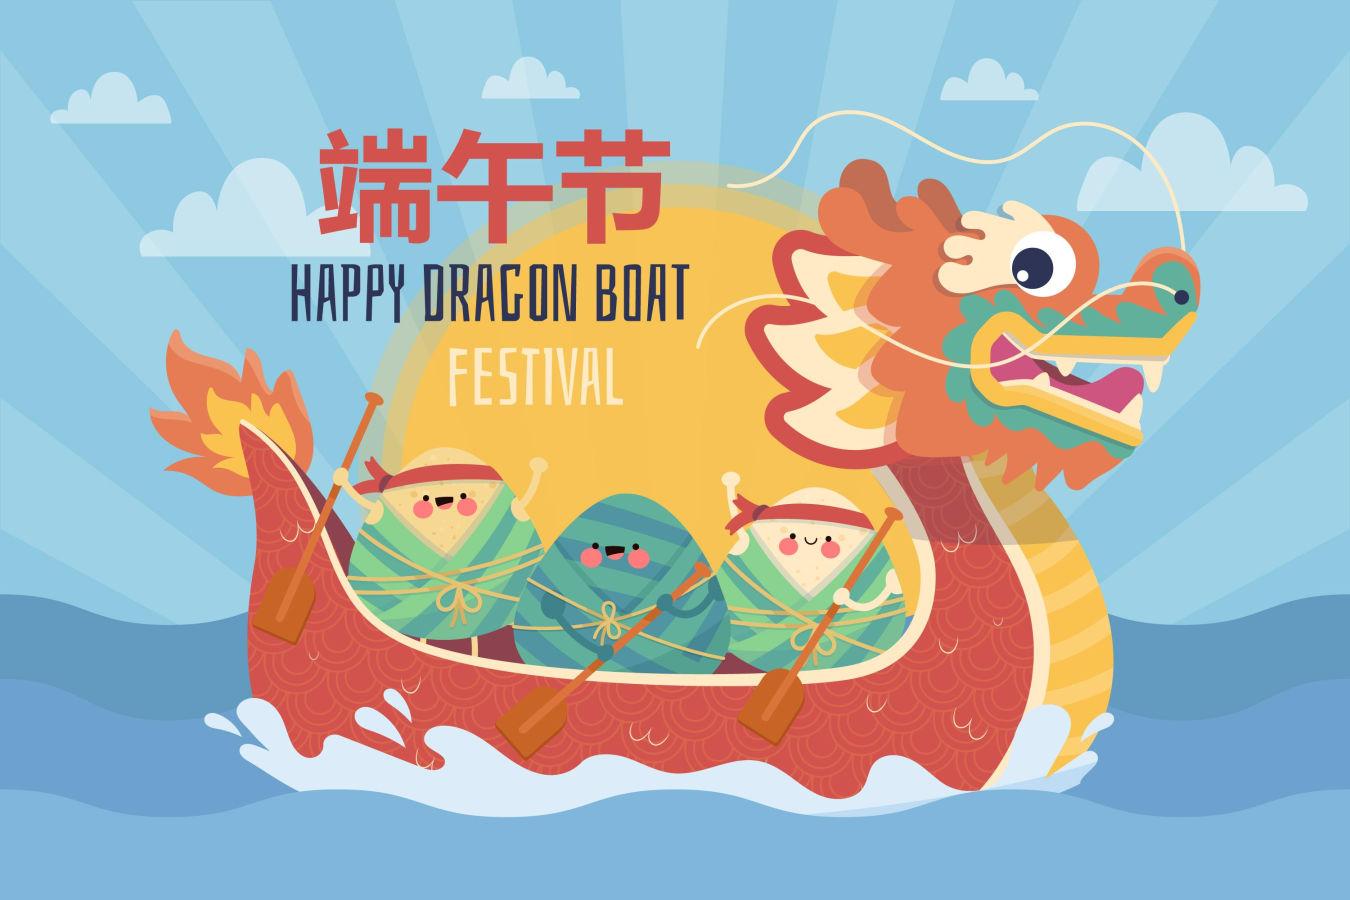 What is the Dragon Boat Festival and why is it celebrated?